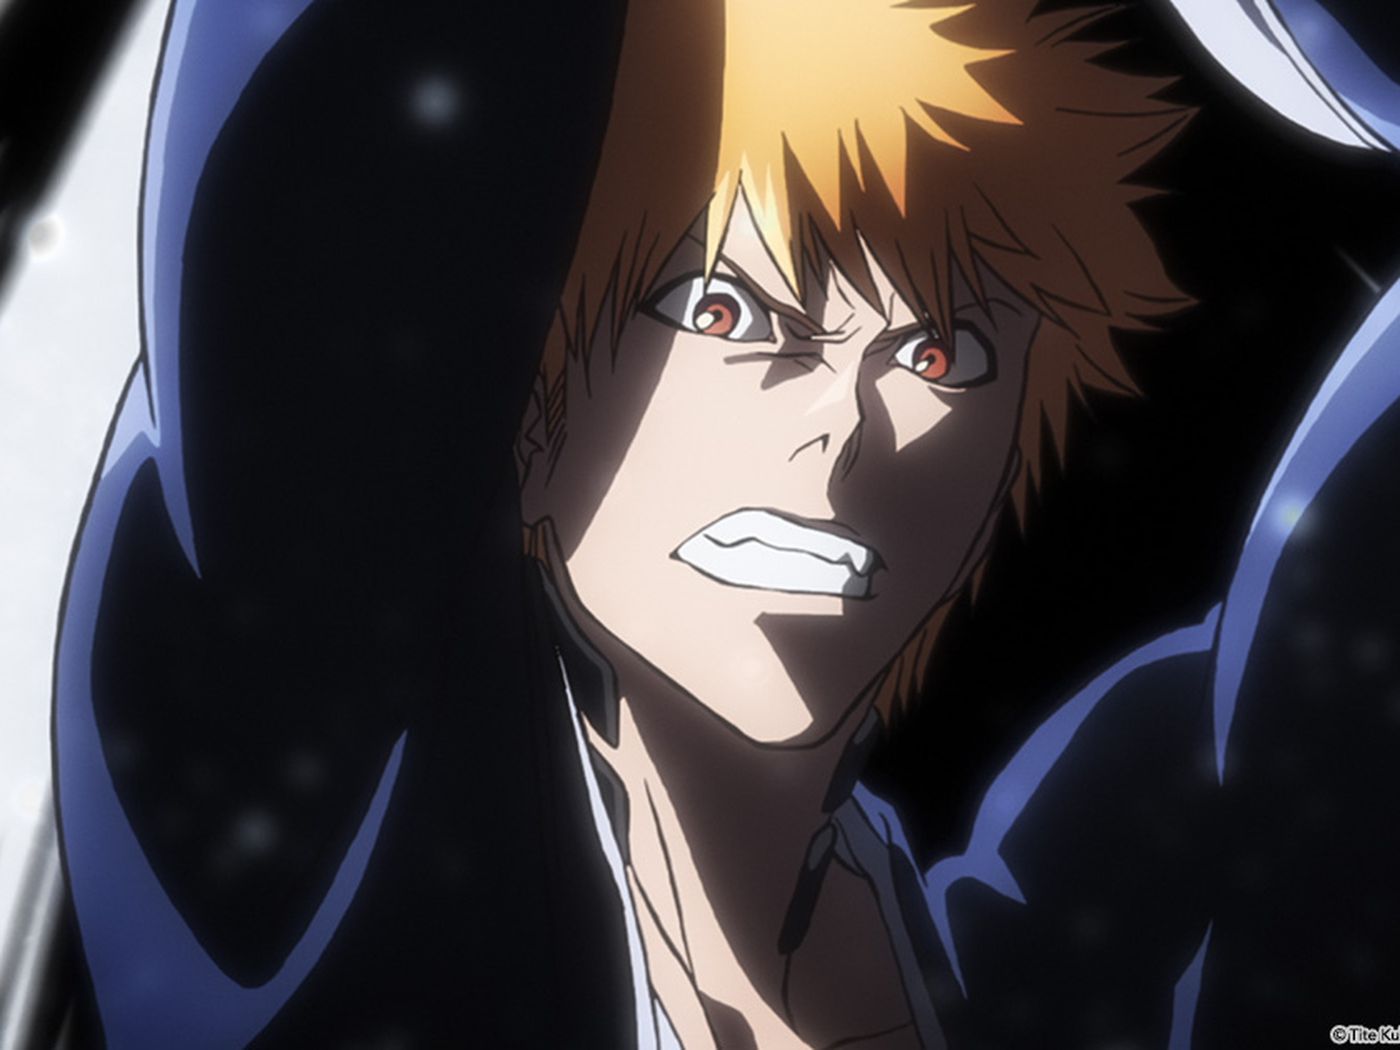 Bleach: Thousand-Year Blood War review: Bleach is back and looks